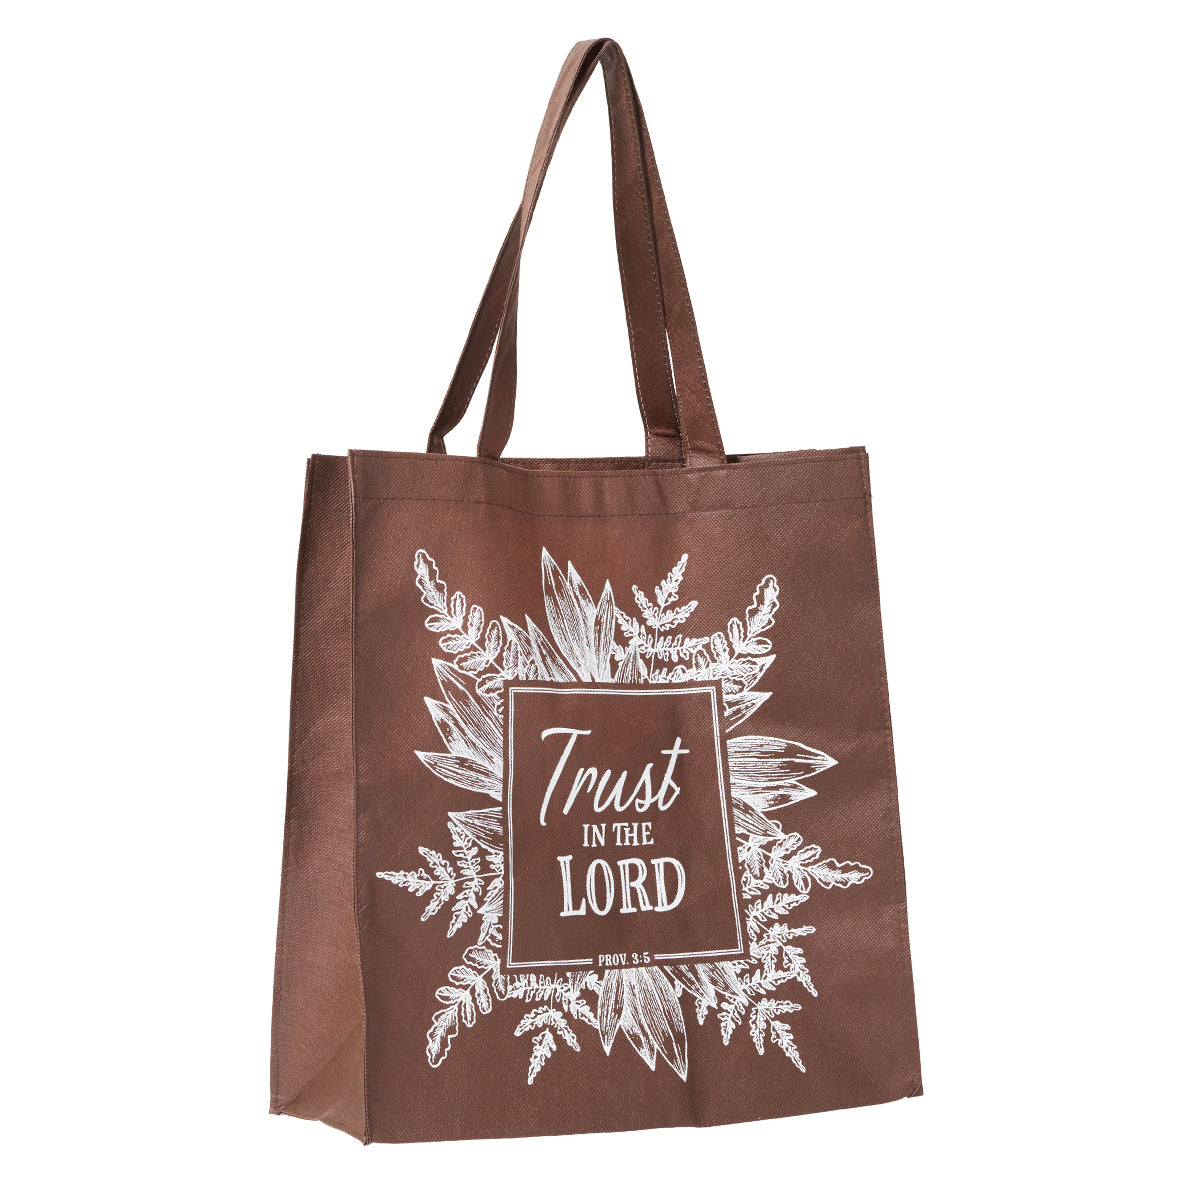 Trust In The Lord Tote Bag - I AM INTENTIONAL 